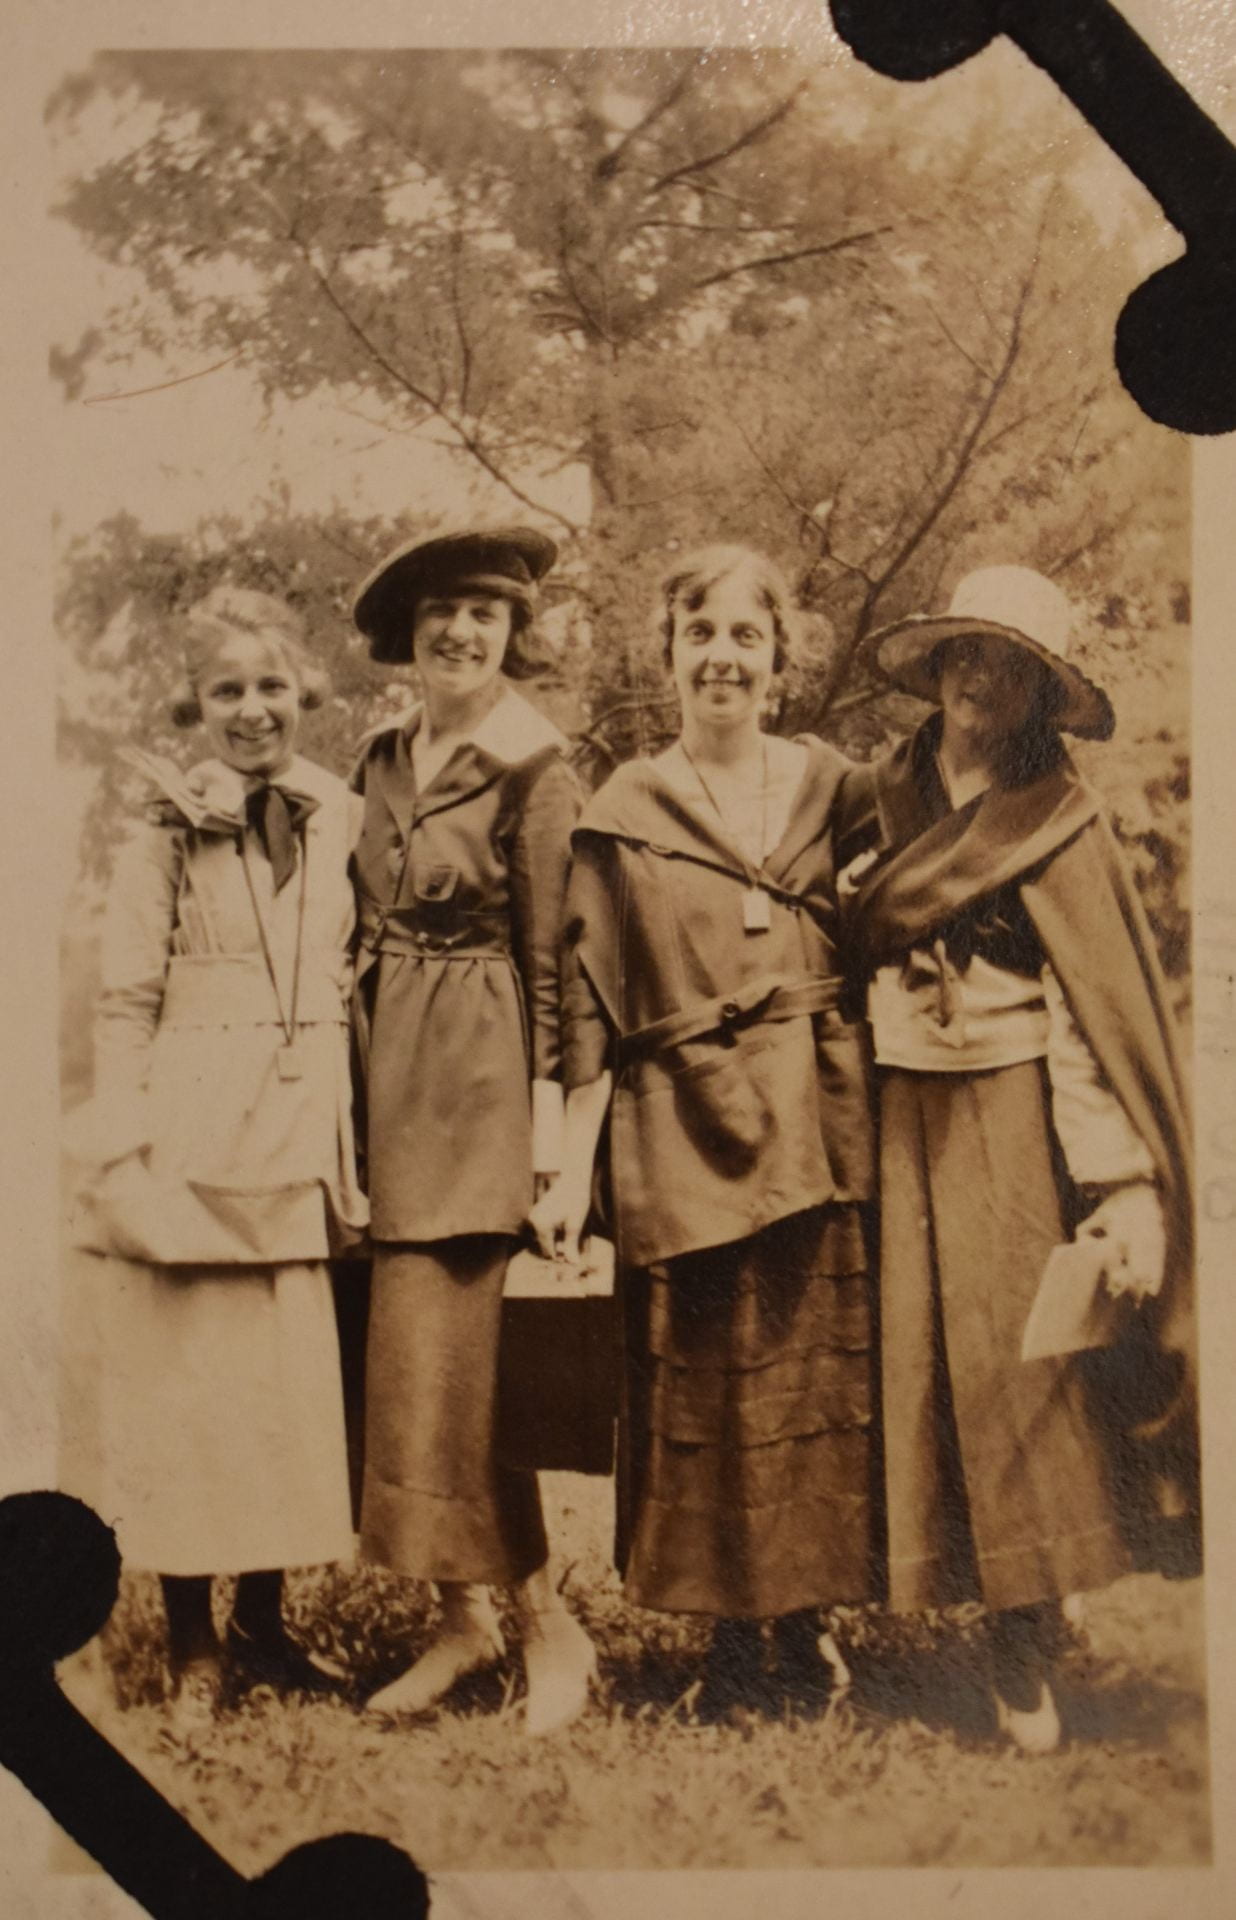 A black and white image of four women posing next to each other. They are wearing early 20th century dresses and hats and smiling at the camera.